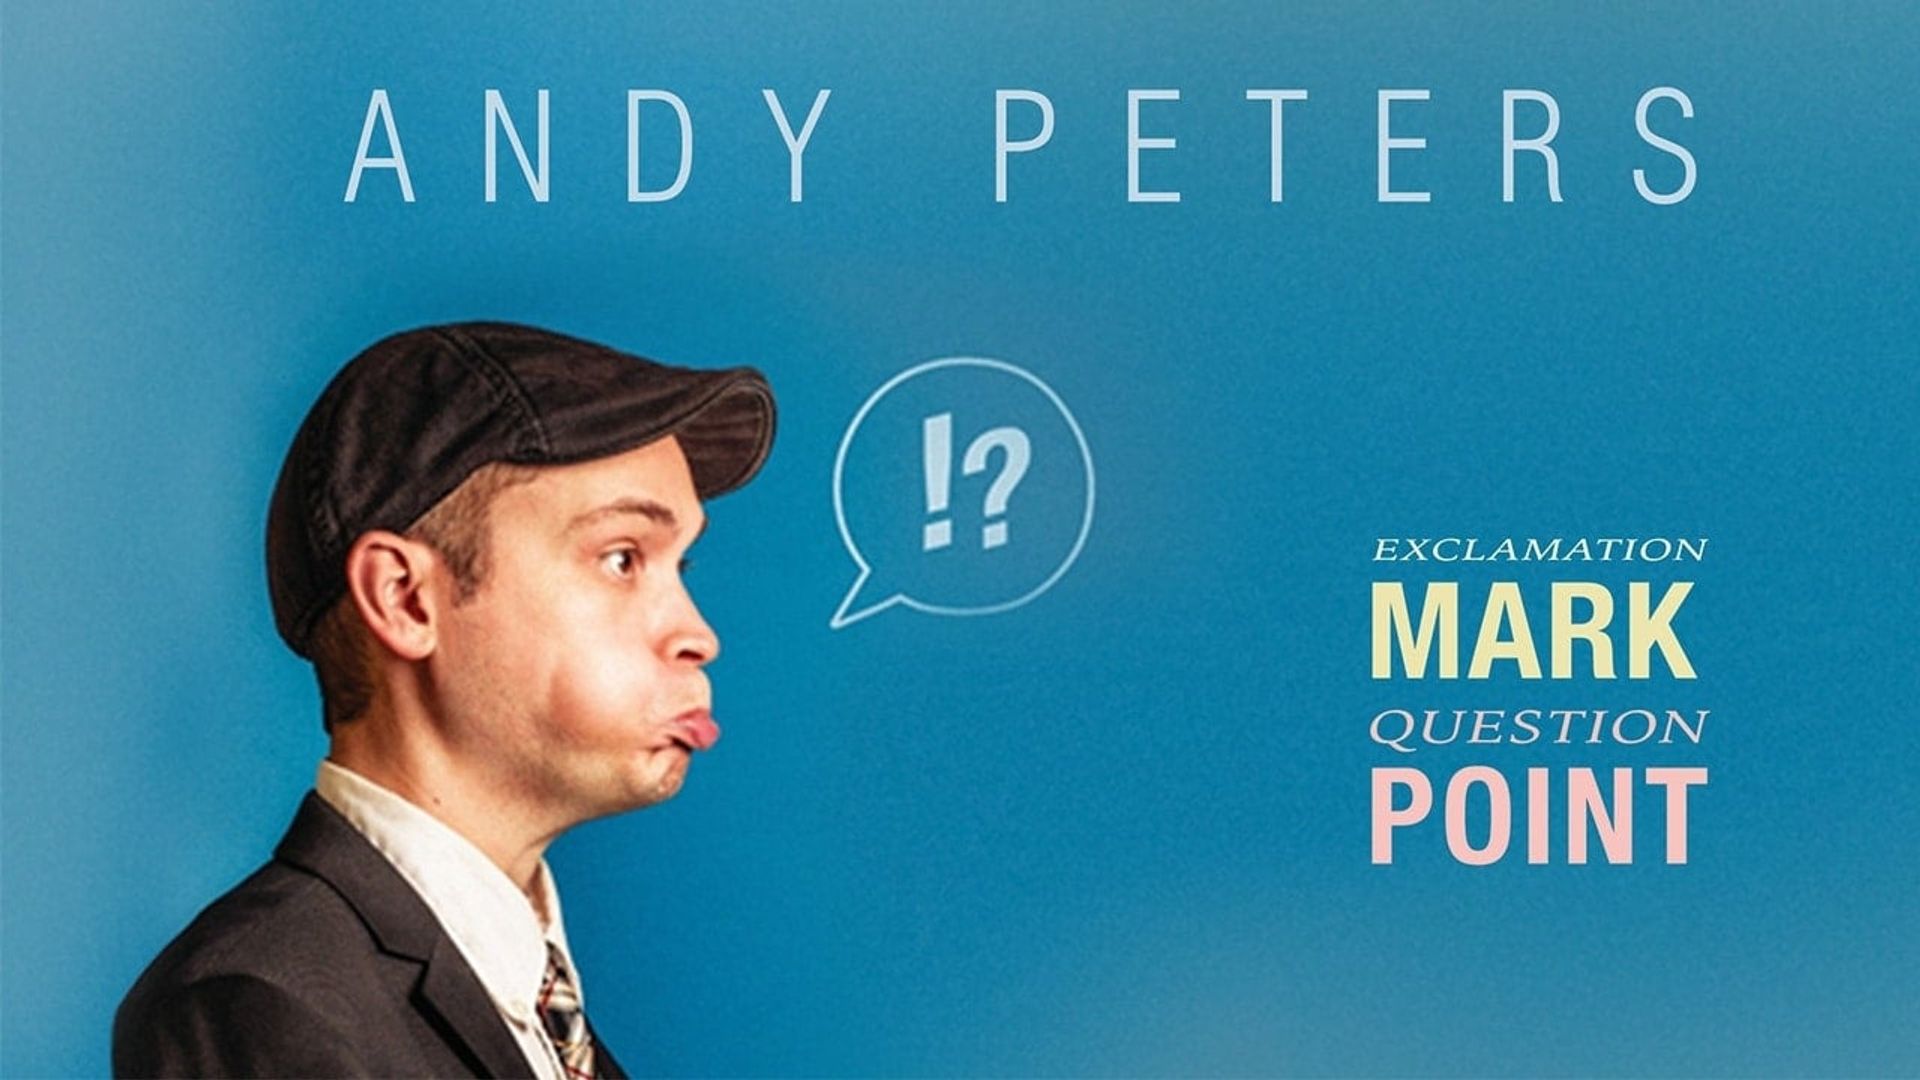 Andy Peters: Exclamation Mark Question Point background